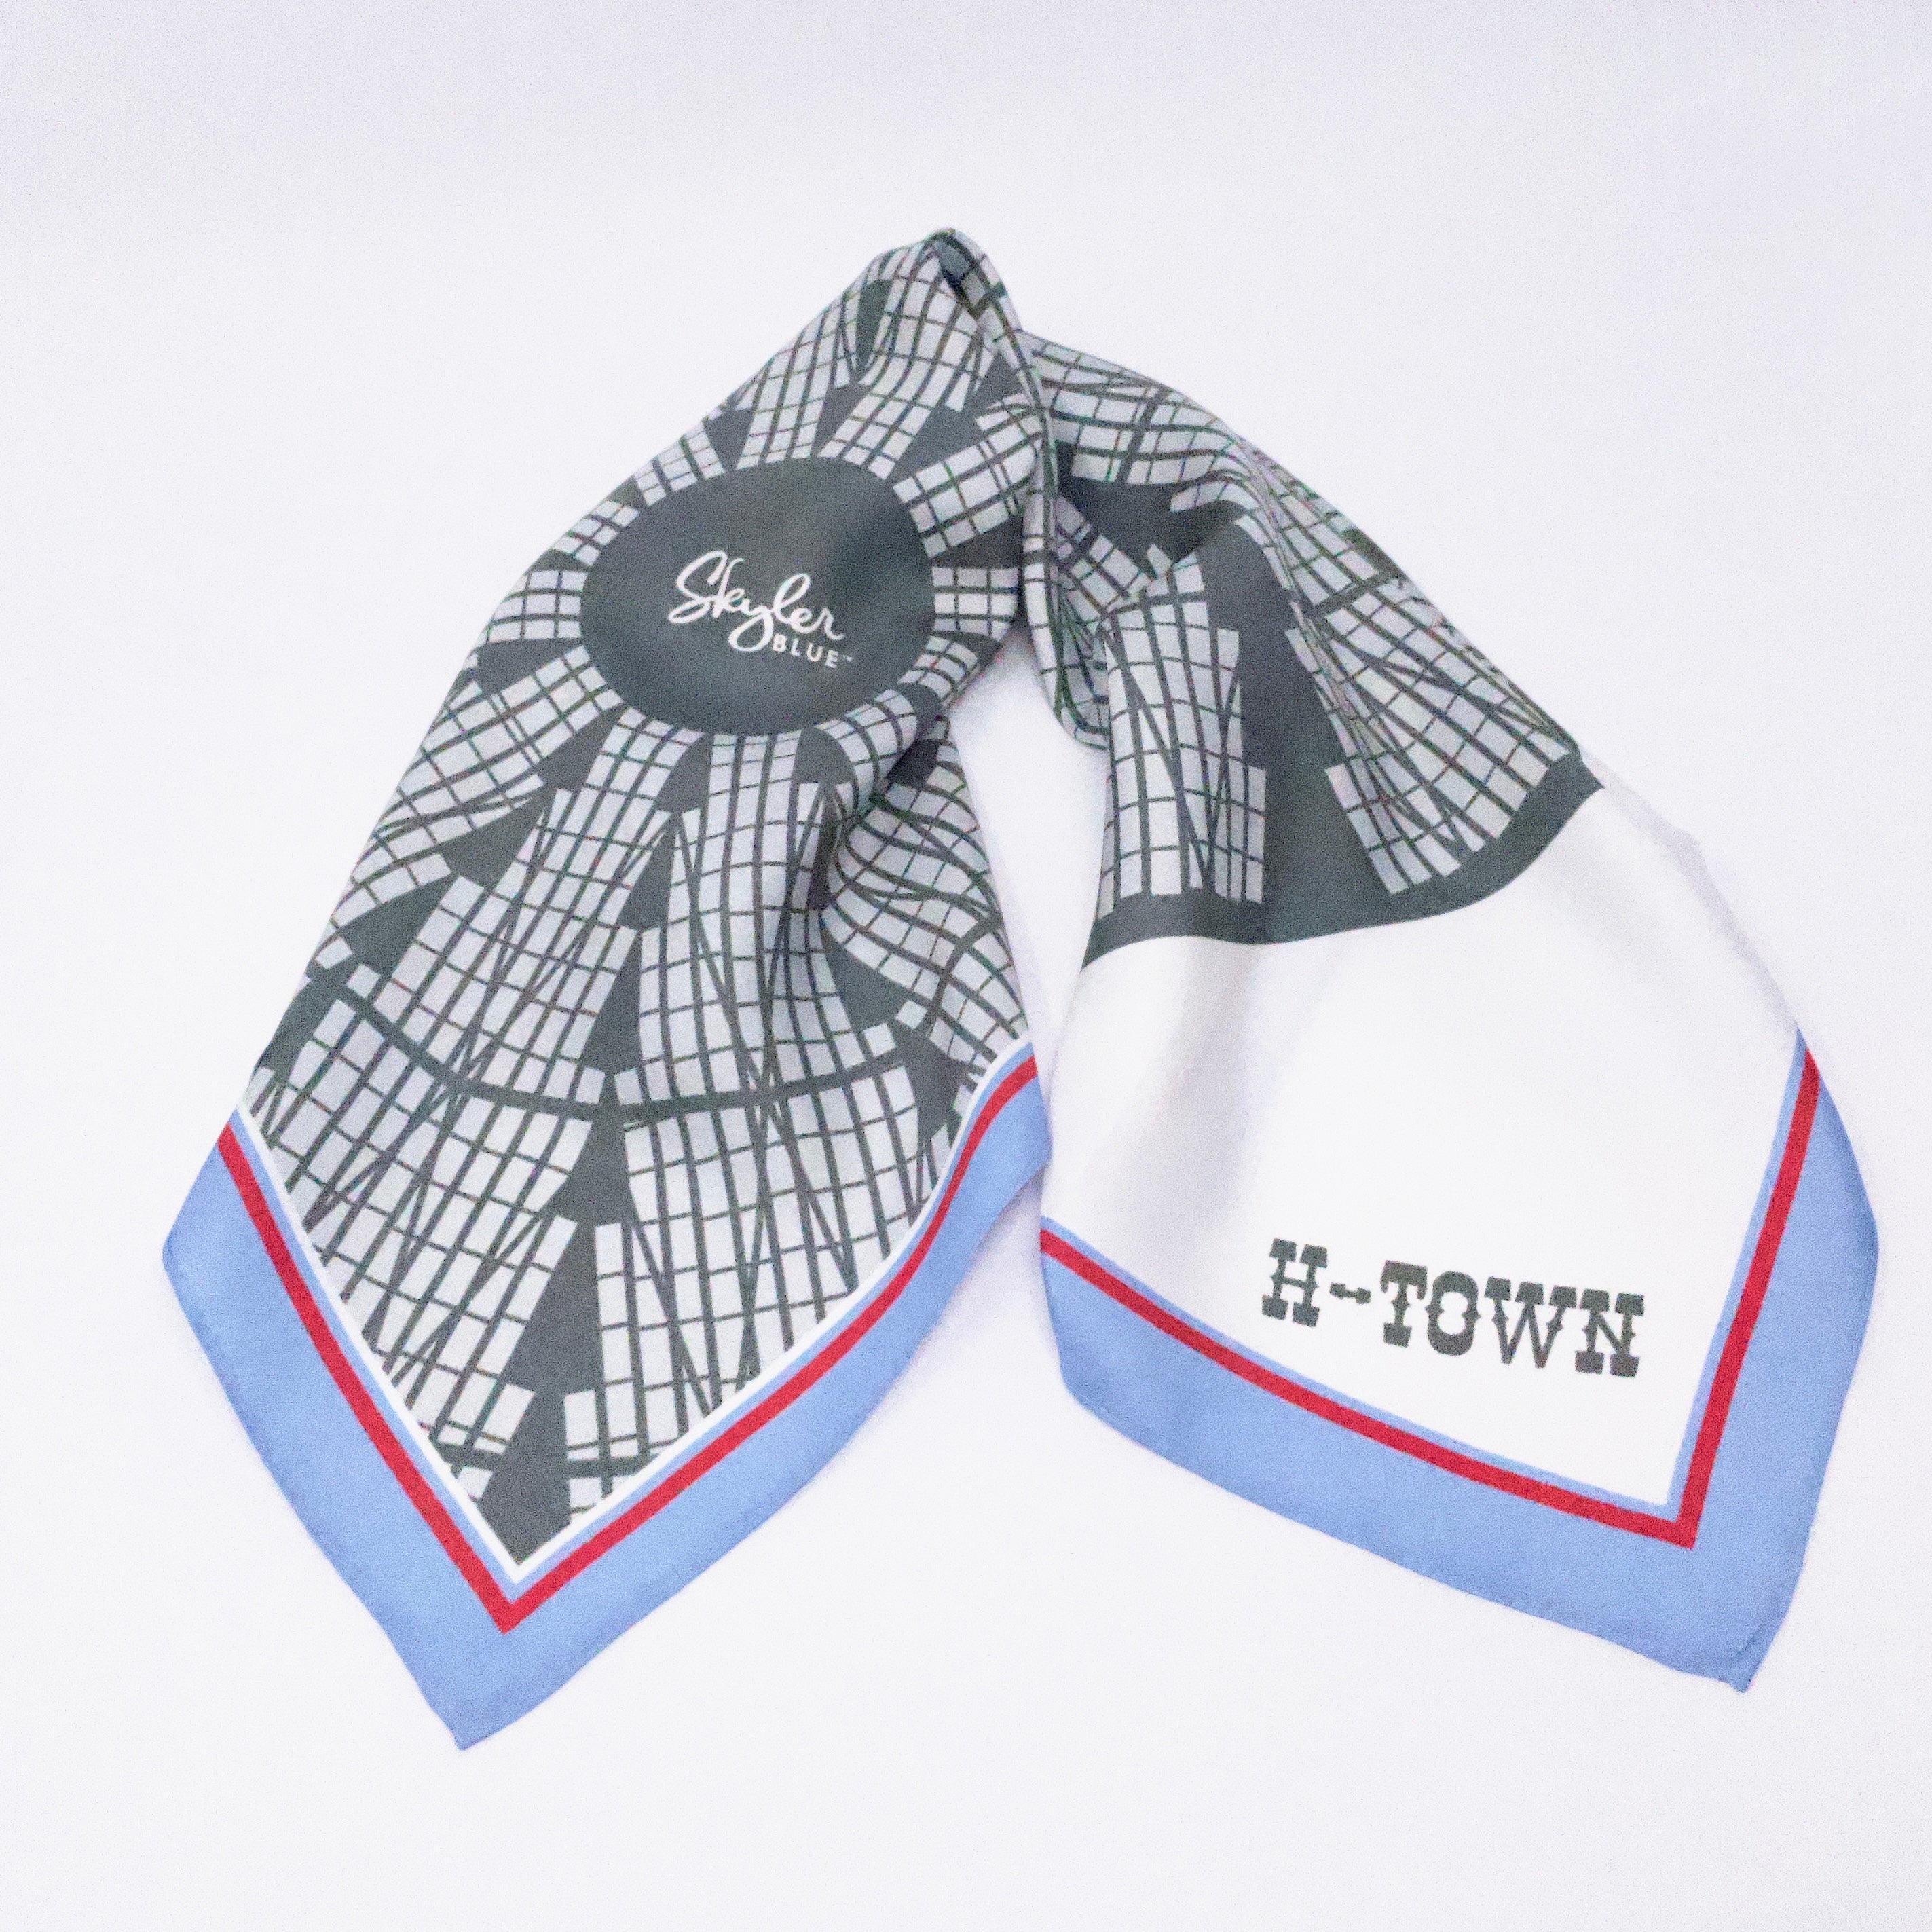 Skyler Blue’s The Dome - H-Town 60-centimeter 100% silk twill scarf